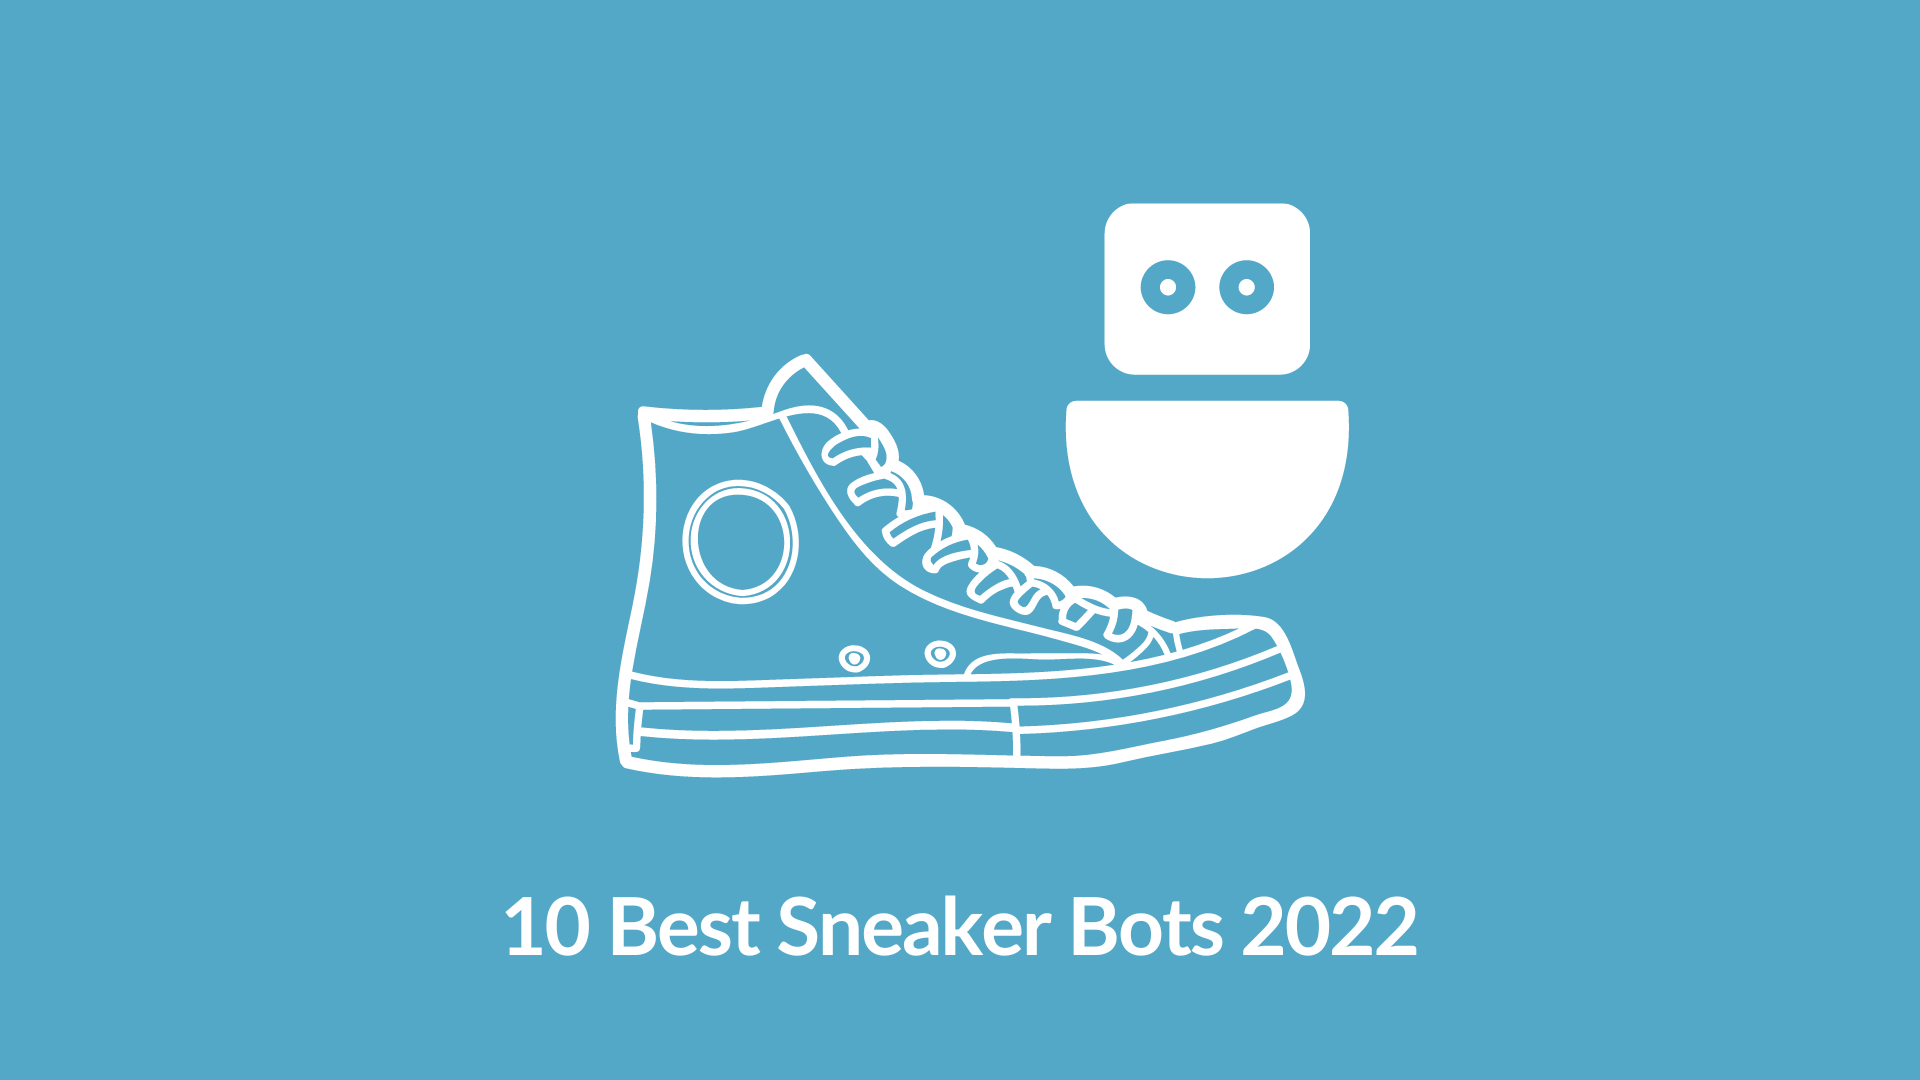 Get Ahead of the Game: Discover the 10 Sneaker Bots of 2023